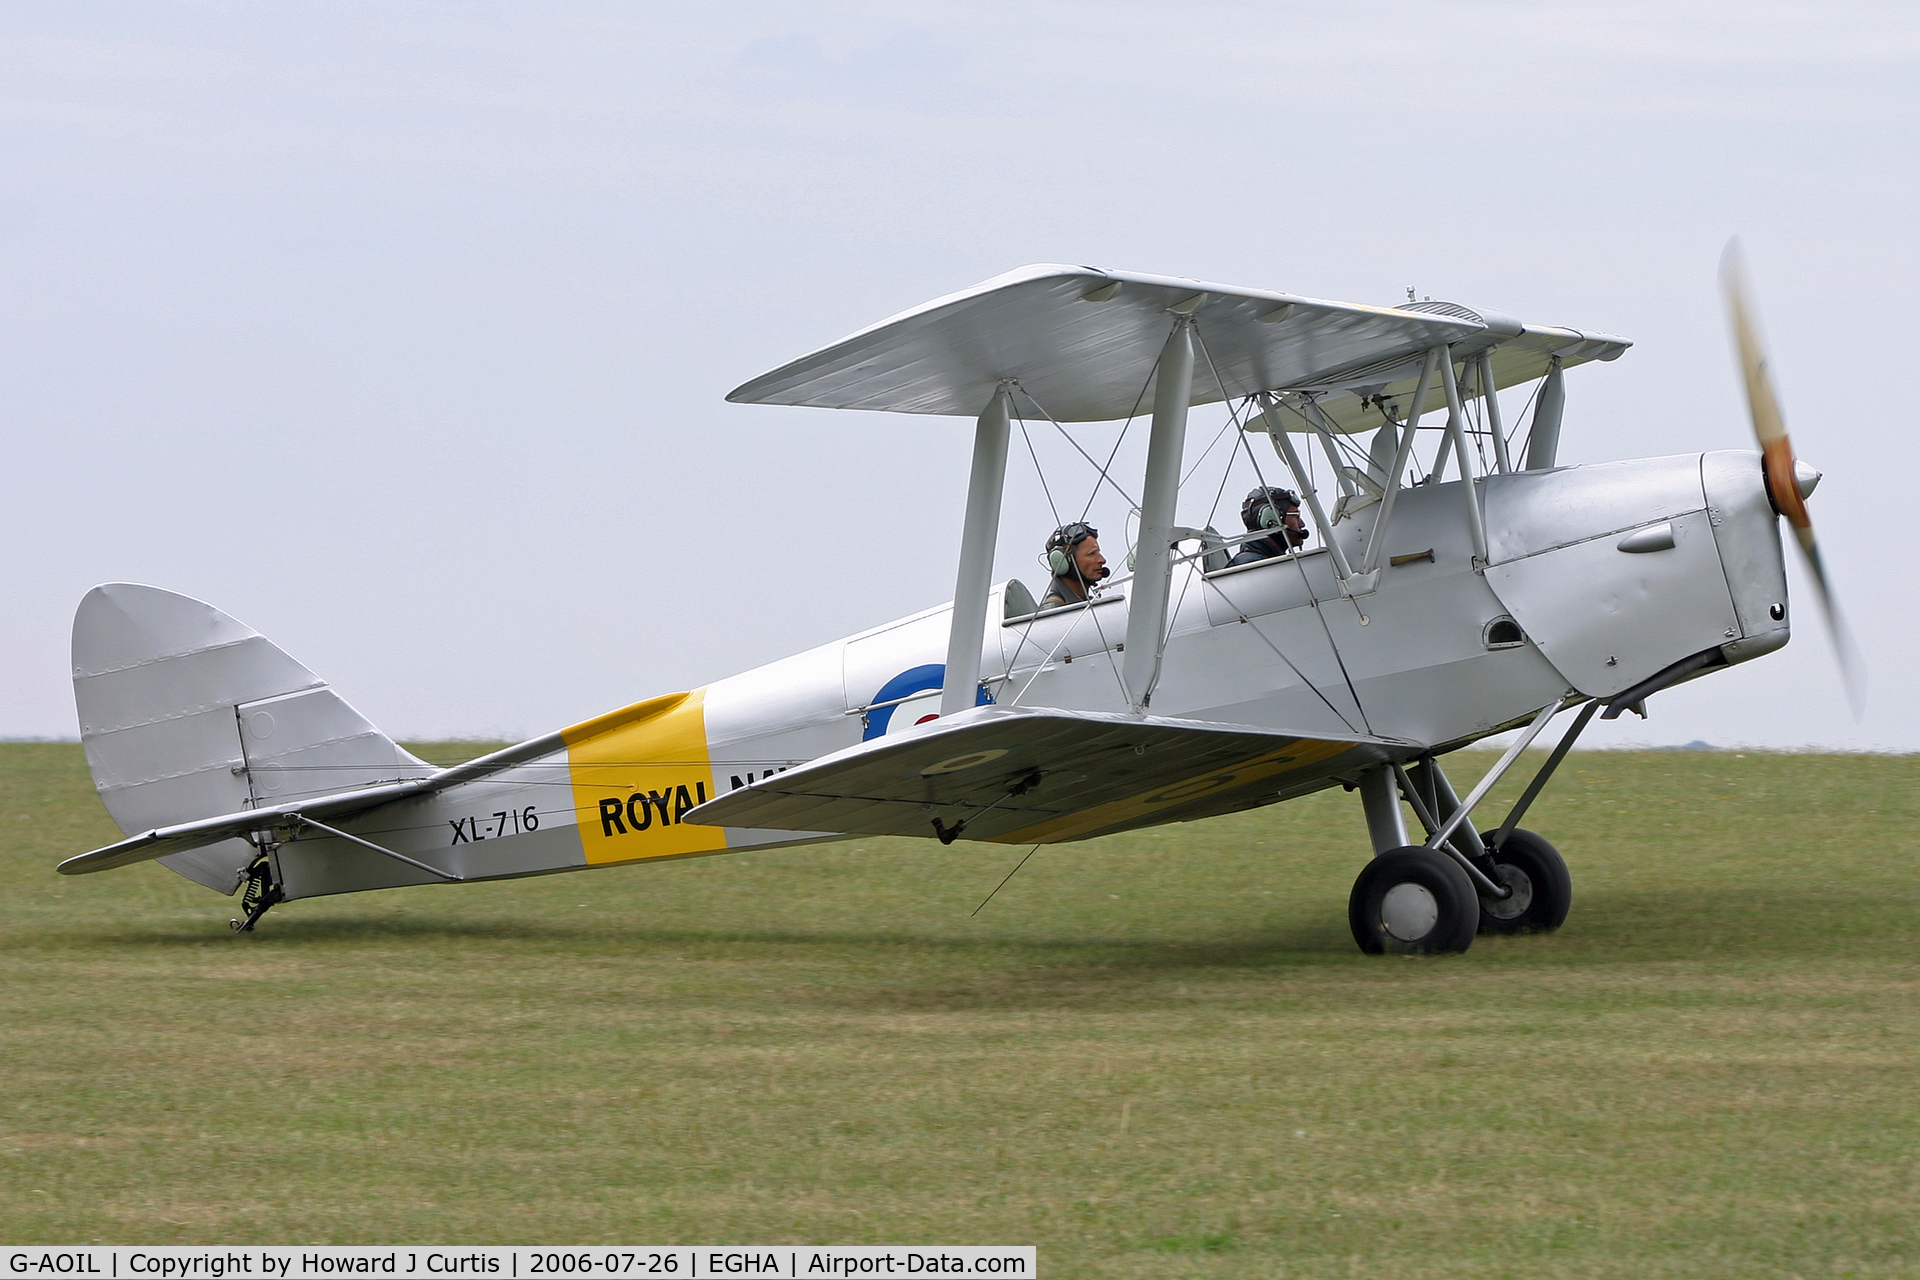 G-AOIL, 1940 De Havilland DH-82A Tiger Moth II C/N 83673, Privately owned. Painted as XL-716.